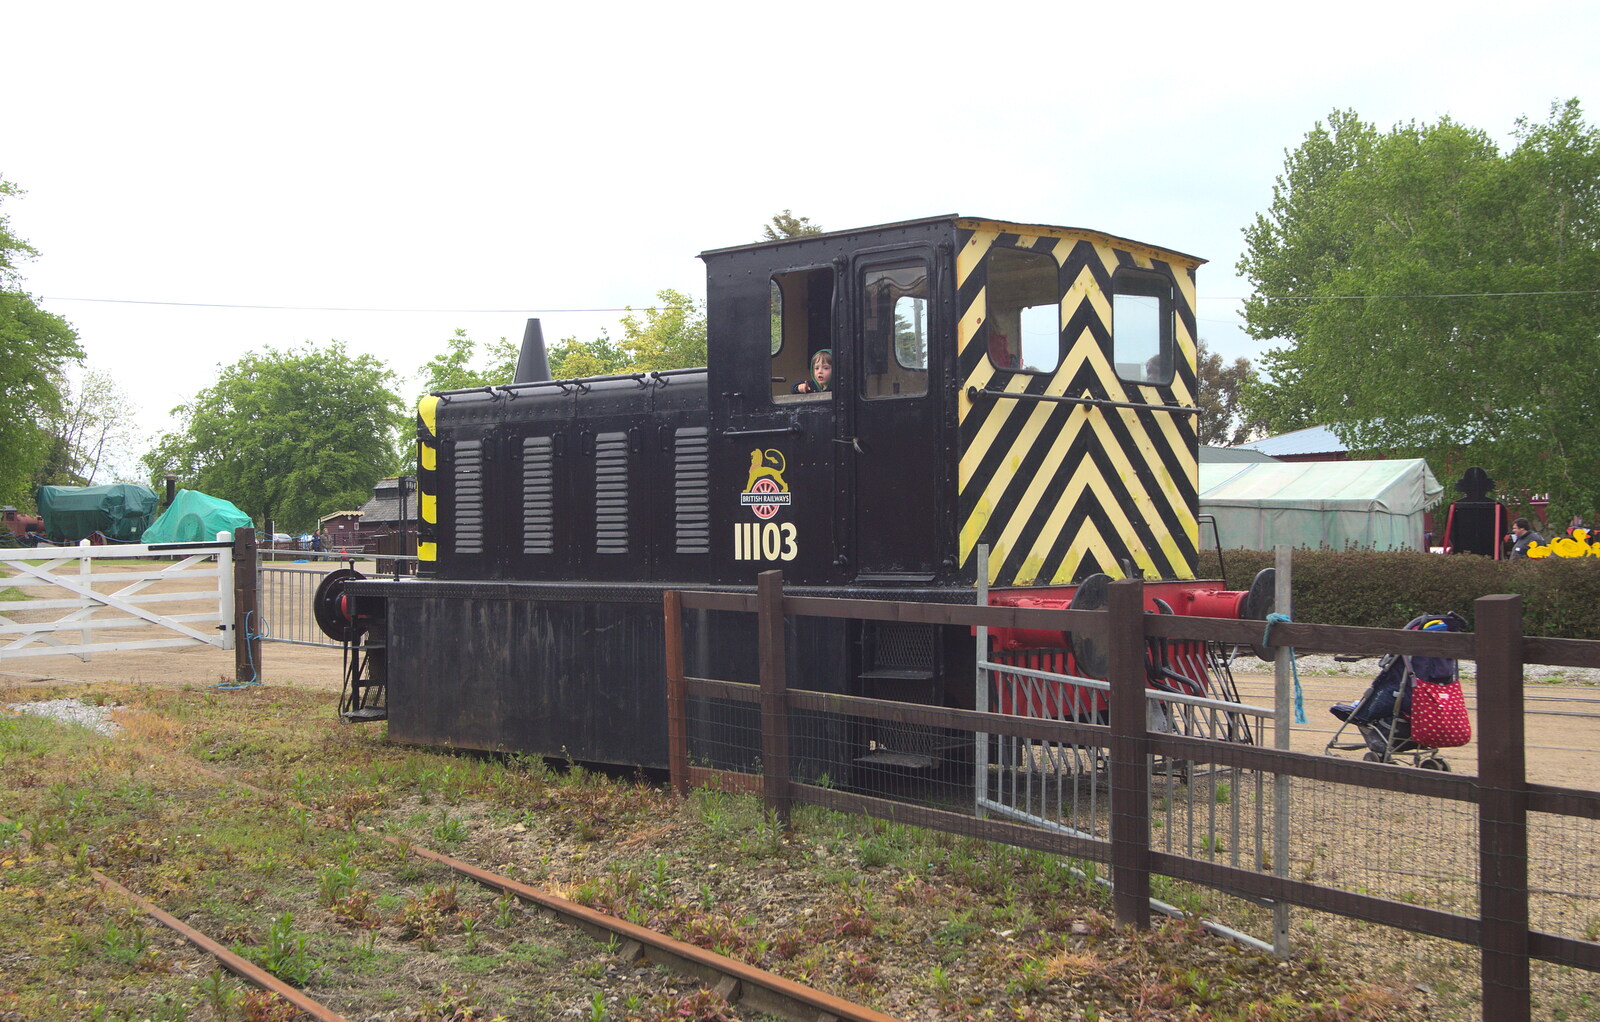 Shunter 11103 - Mavis from A Day at Bressingham Steam and Gardens, Diss, Norfolk - 18th May 2013